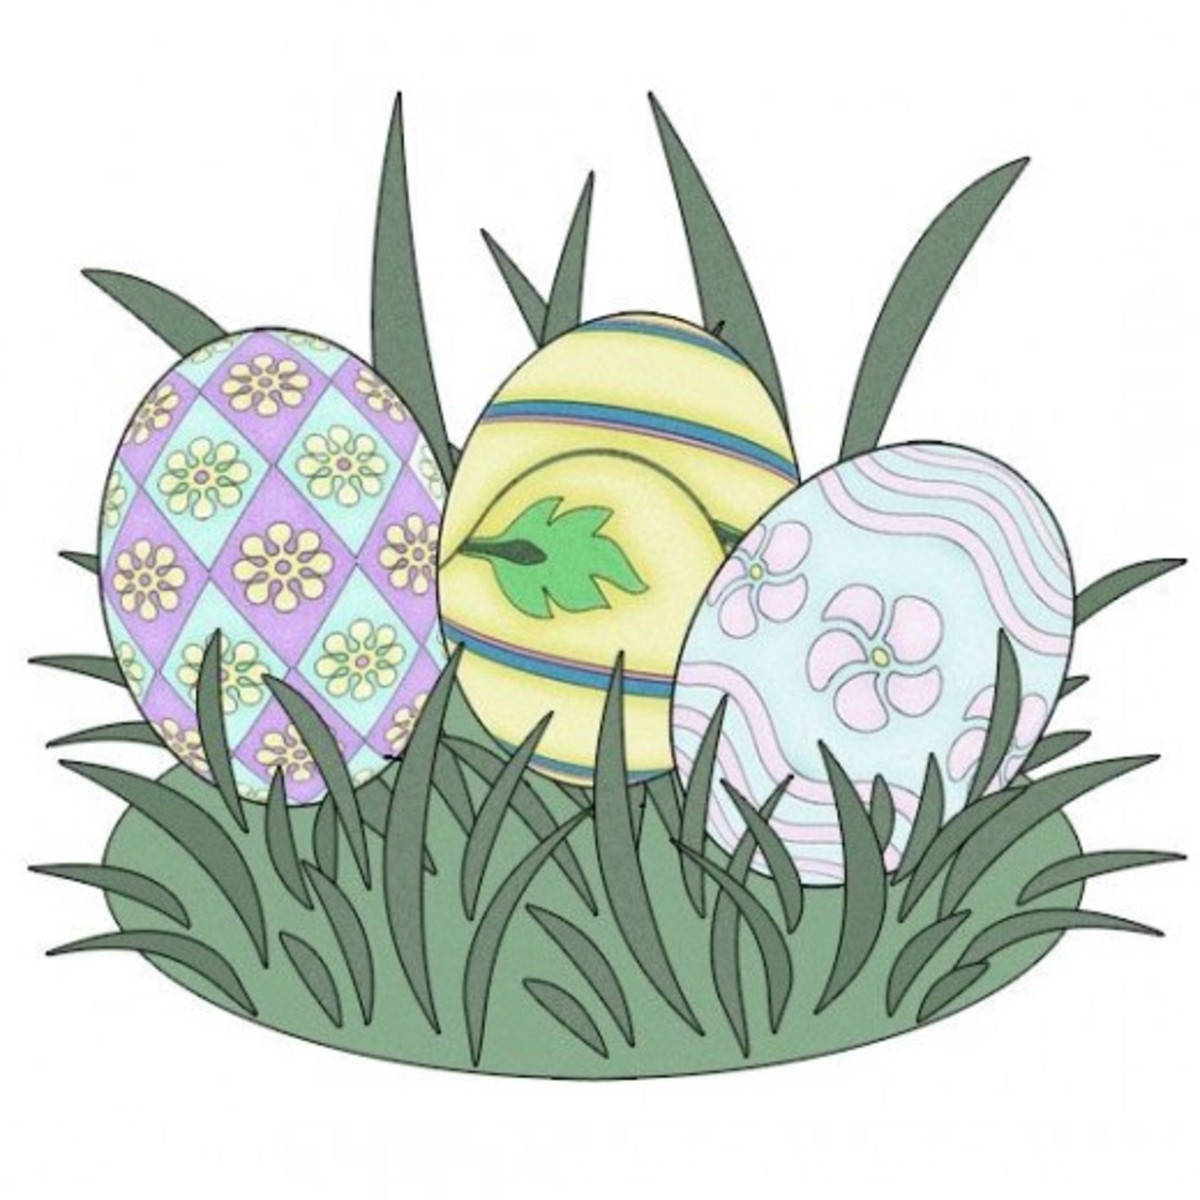 Free Easter Clip Art Images Crosses, Bunnies, Eggs, Baskets & More